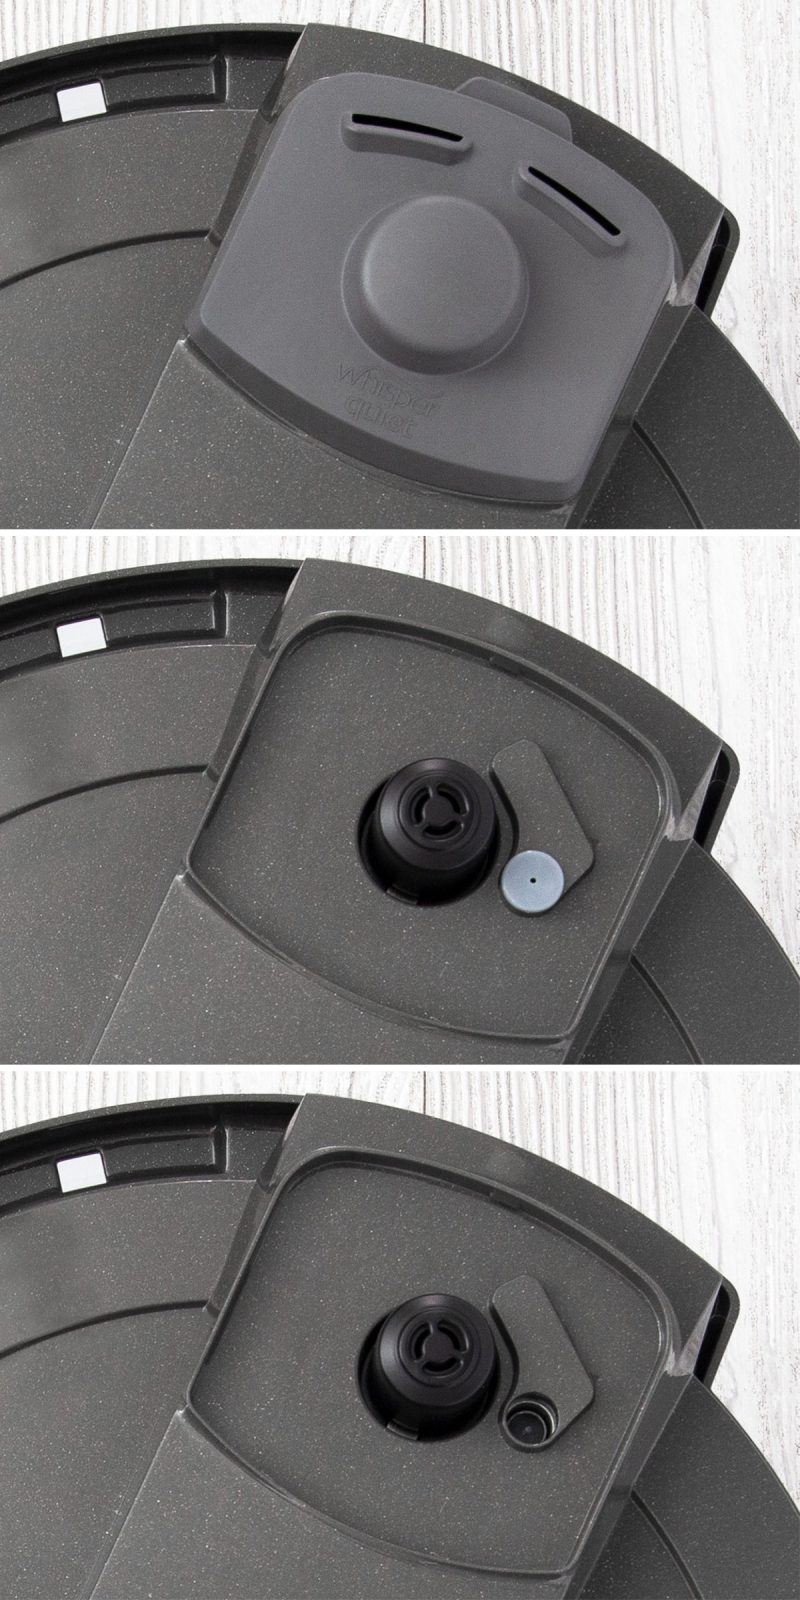 Picture collage showing the steam release valve of the Instant Pot Rio Wide Plus. The top picture shows it with the whisper quiet cover. The second picture shows the release valve and the float valve cover, the final picture shows with the float valve cover removed.